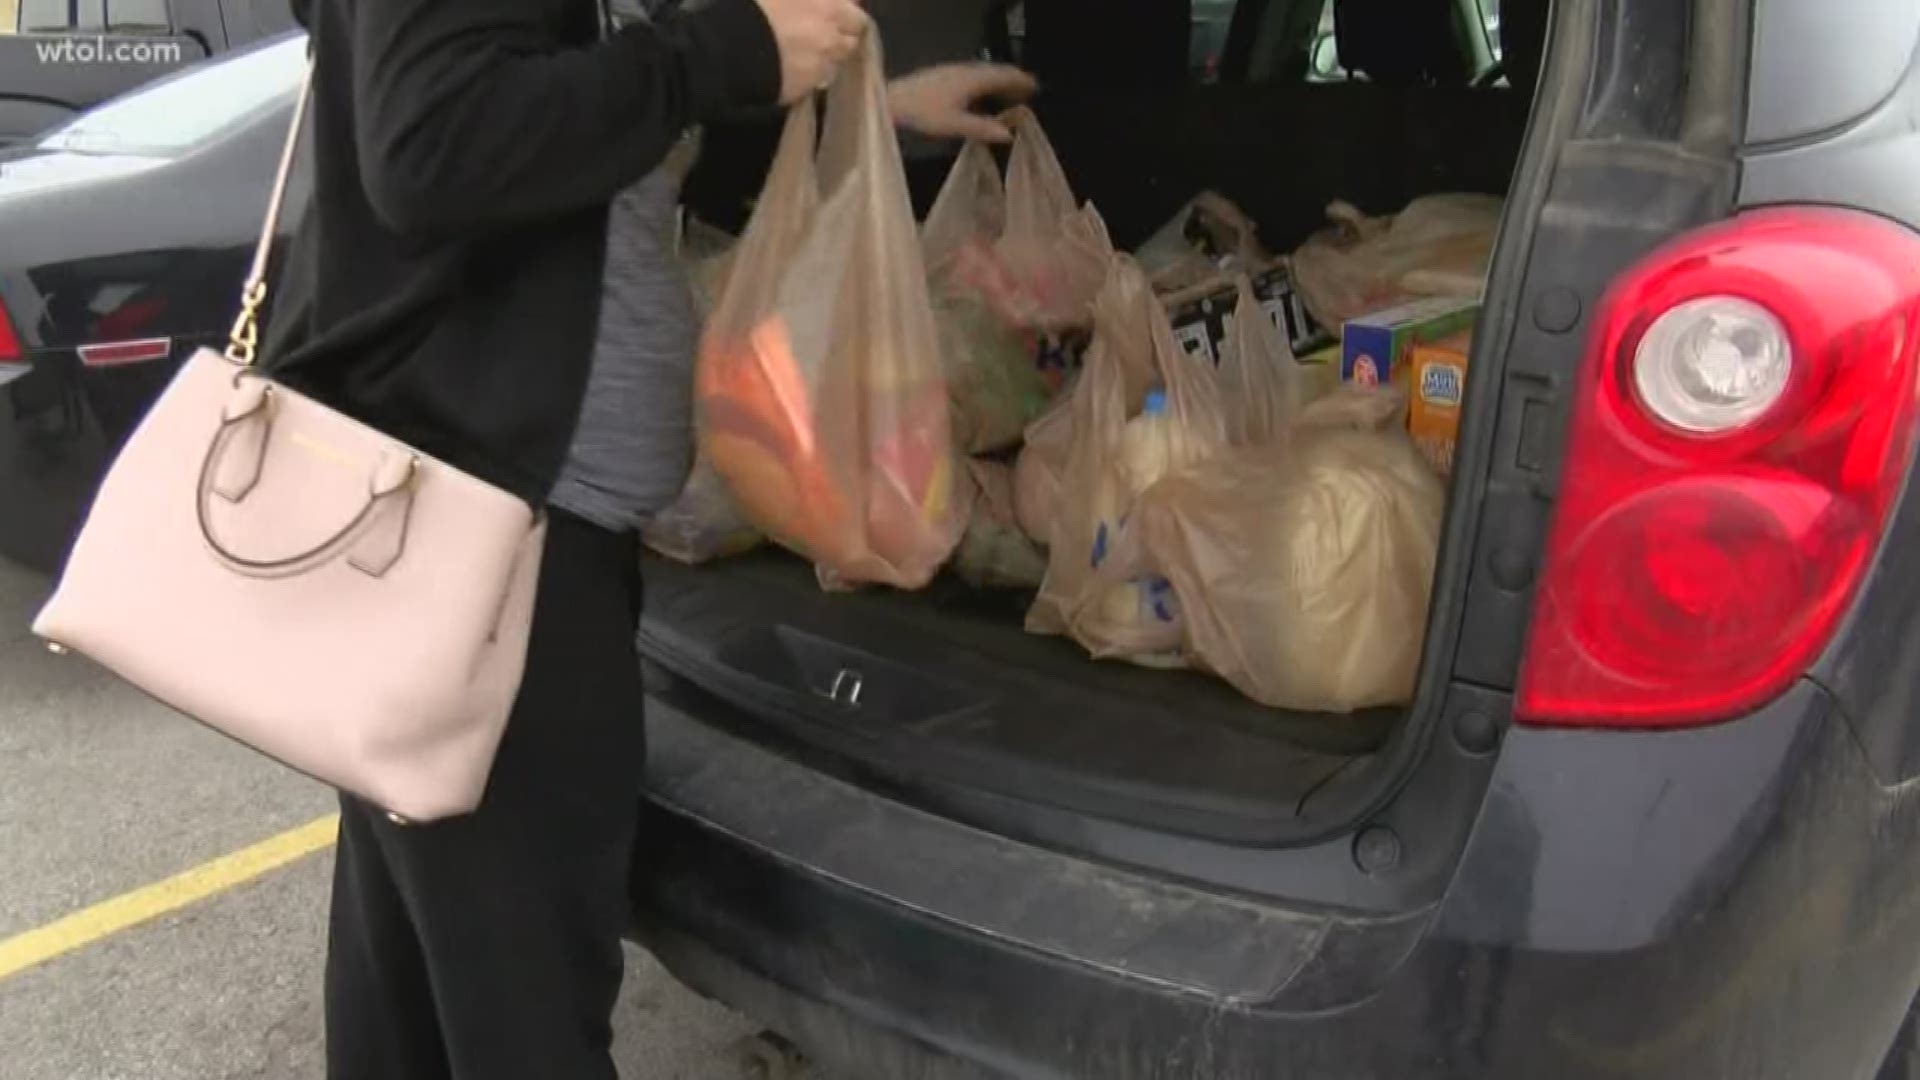 Nicole Kuh is offering to shop for the elderly and homebound that need supplies and groceries during this health crisis.